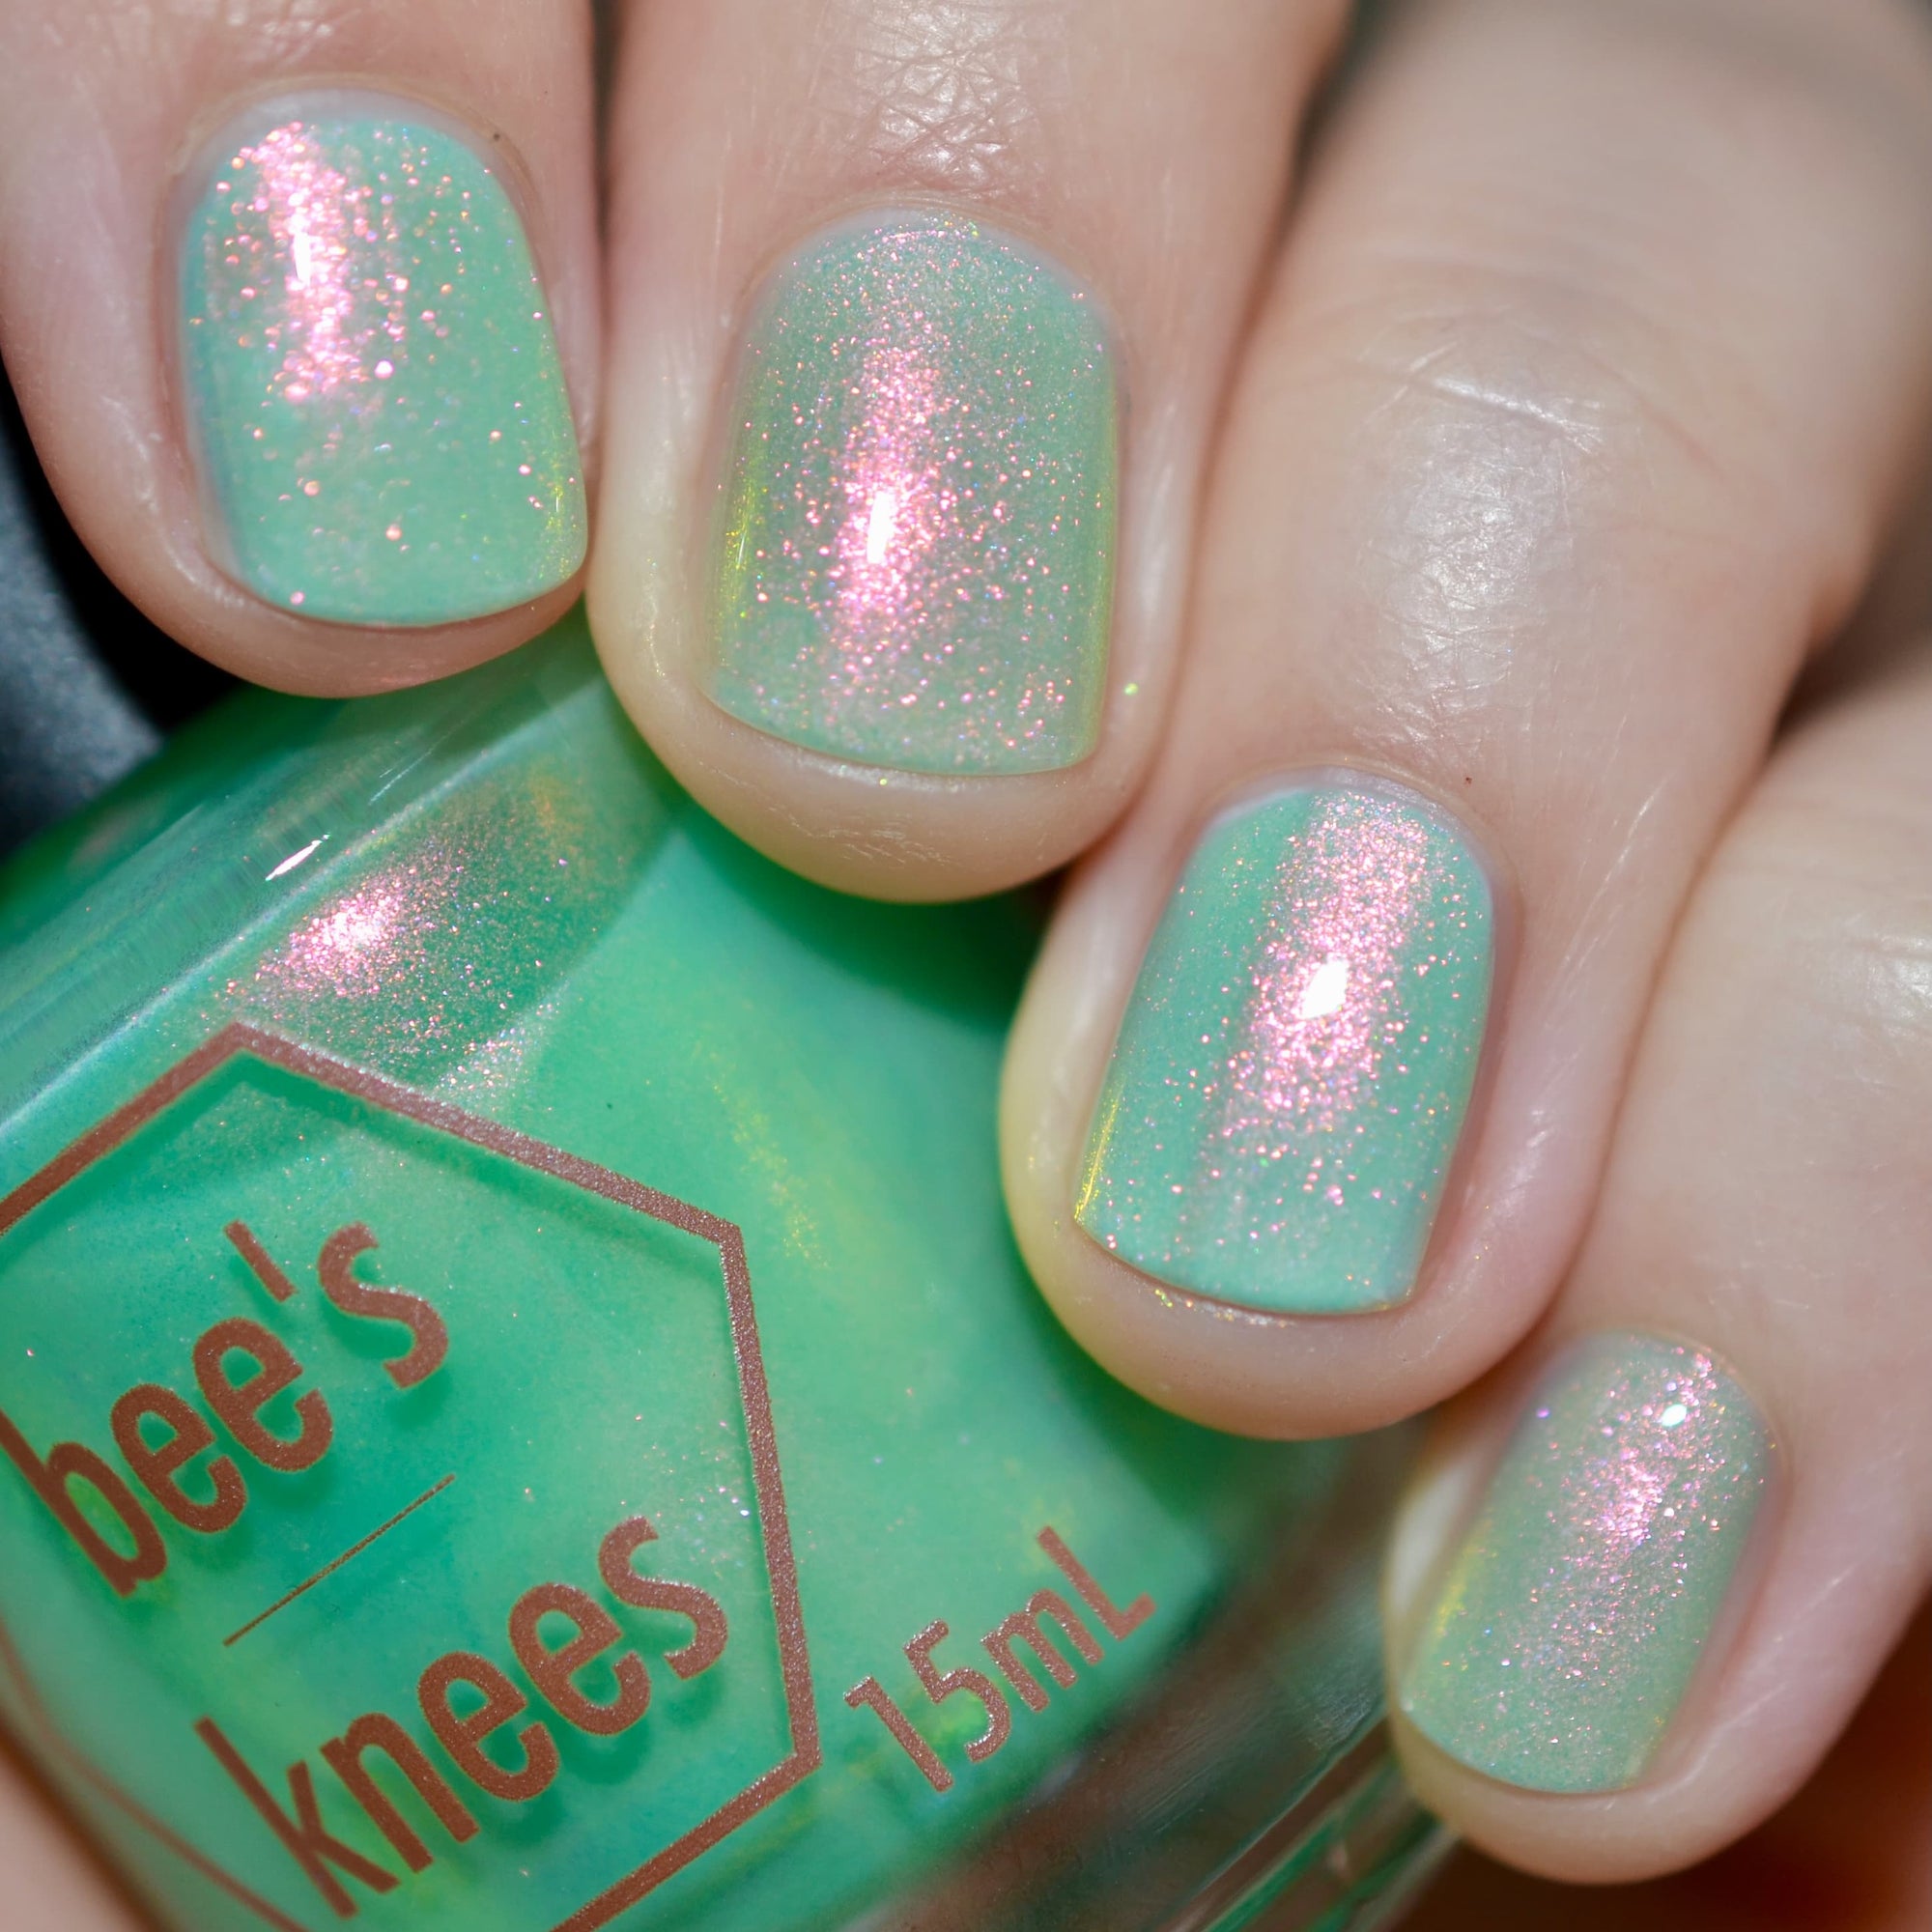 *PRE-ORDER* Bee's Knees Lacquer - I Will Be Your Undoing